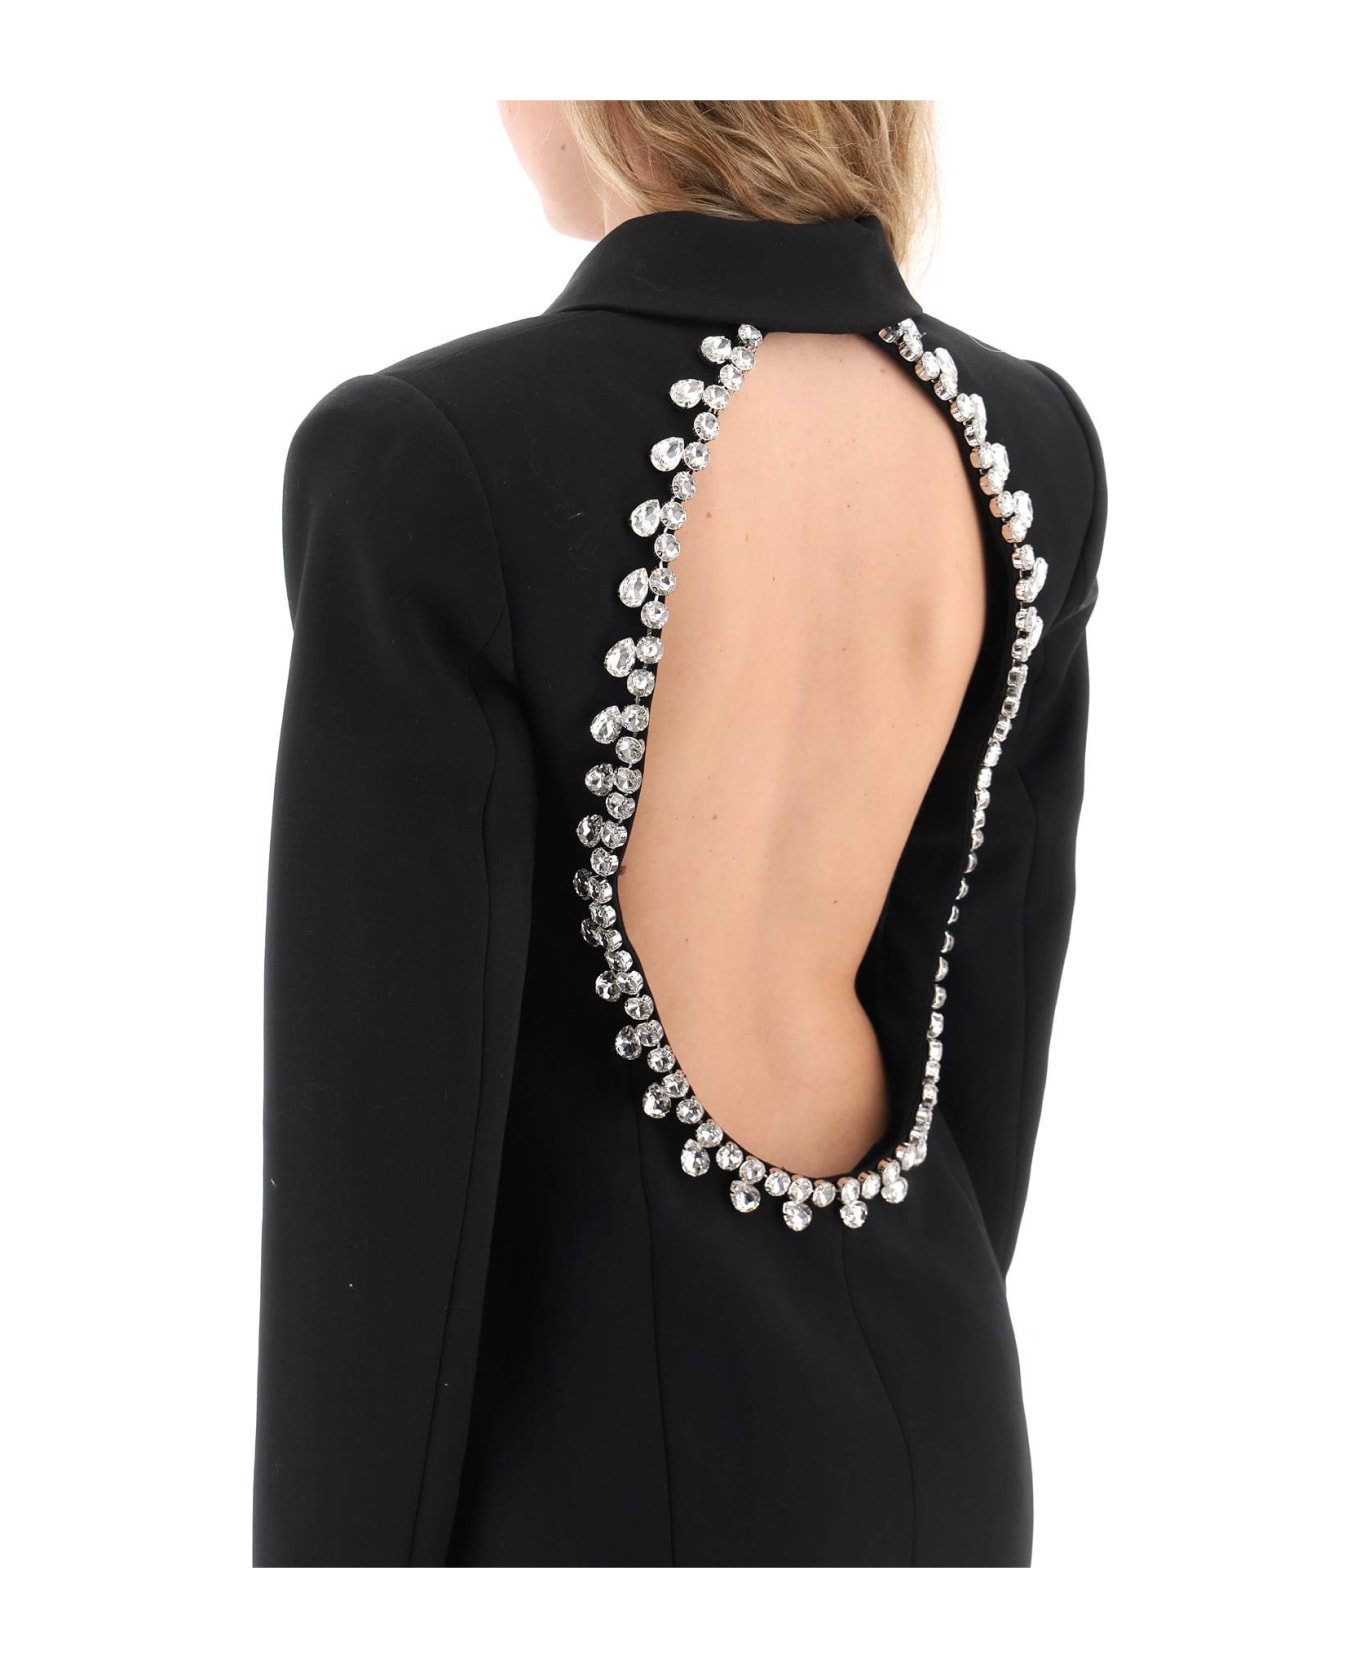 AREA Blazer Dress With Cut-out And Crystals - BLACK (Black) ブレザー